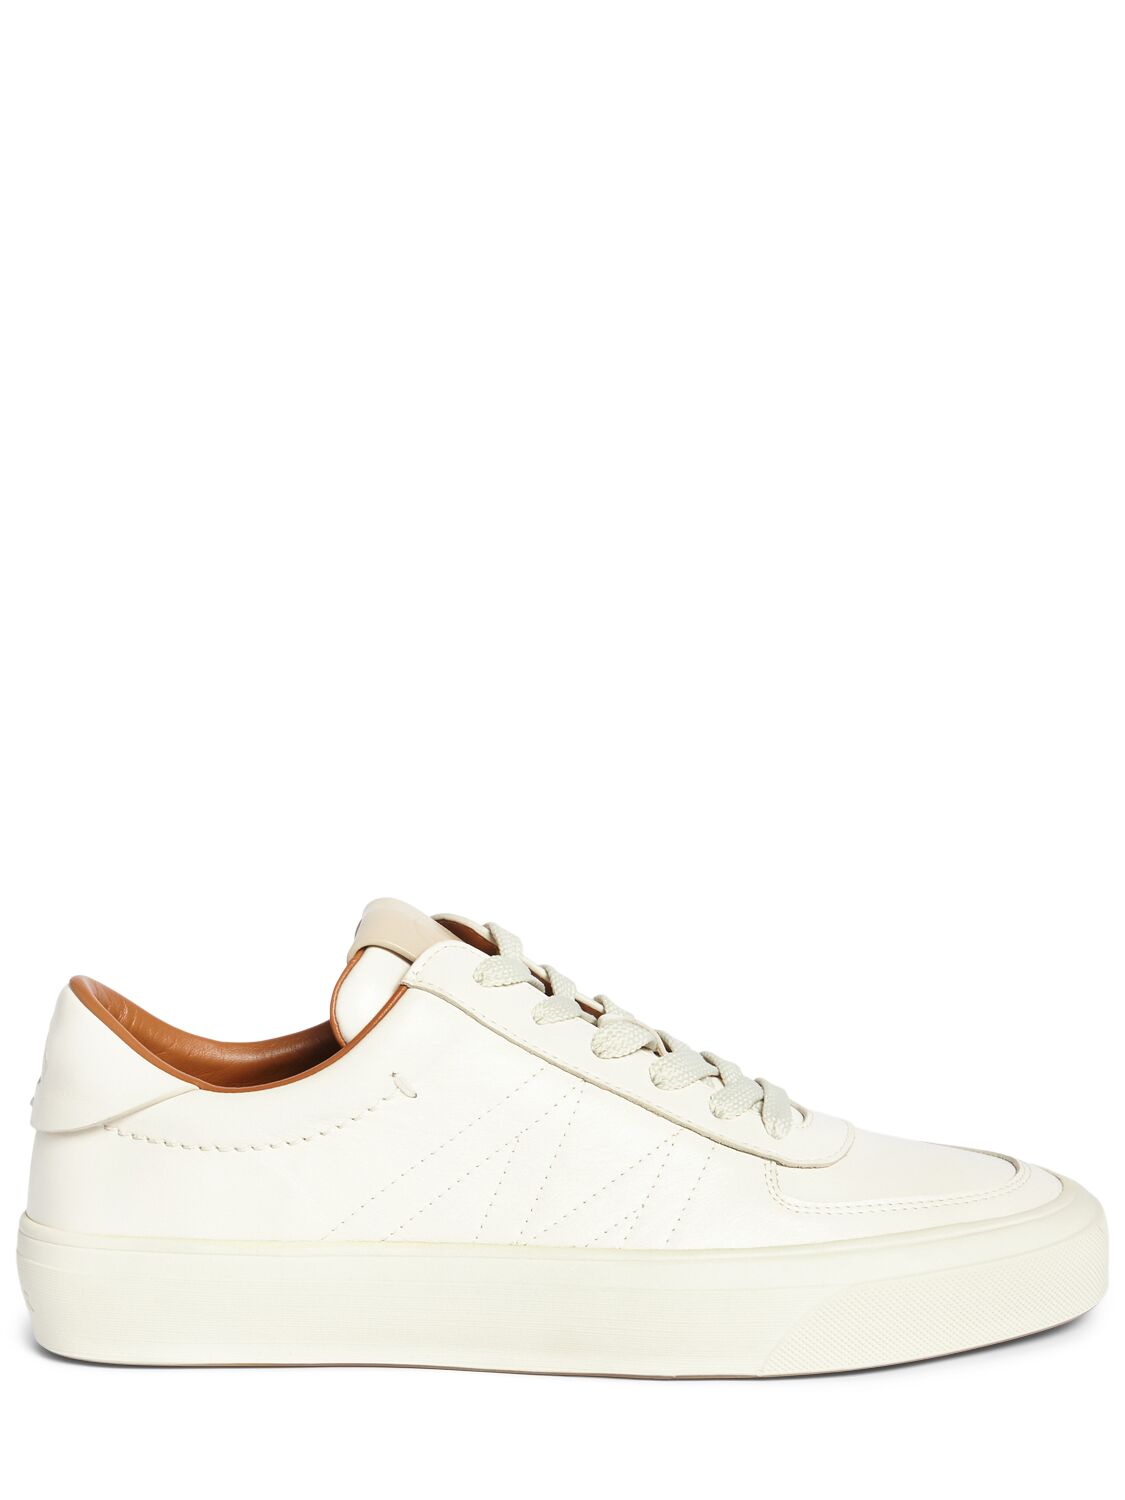 Moncler Monclub Leather Sneakers In White